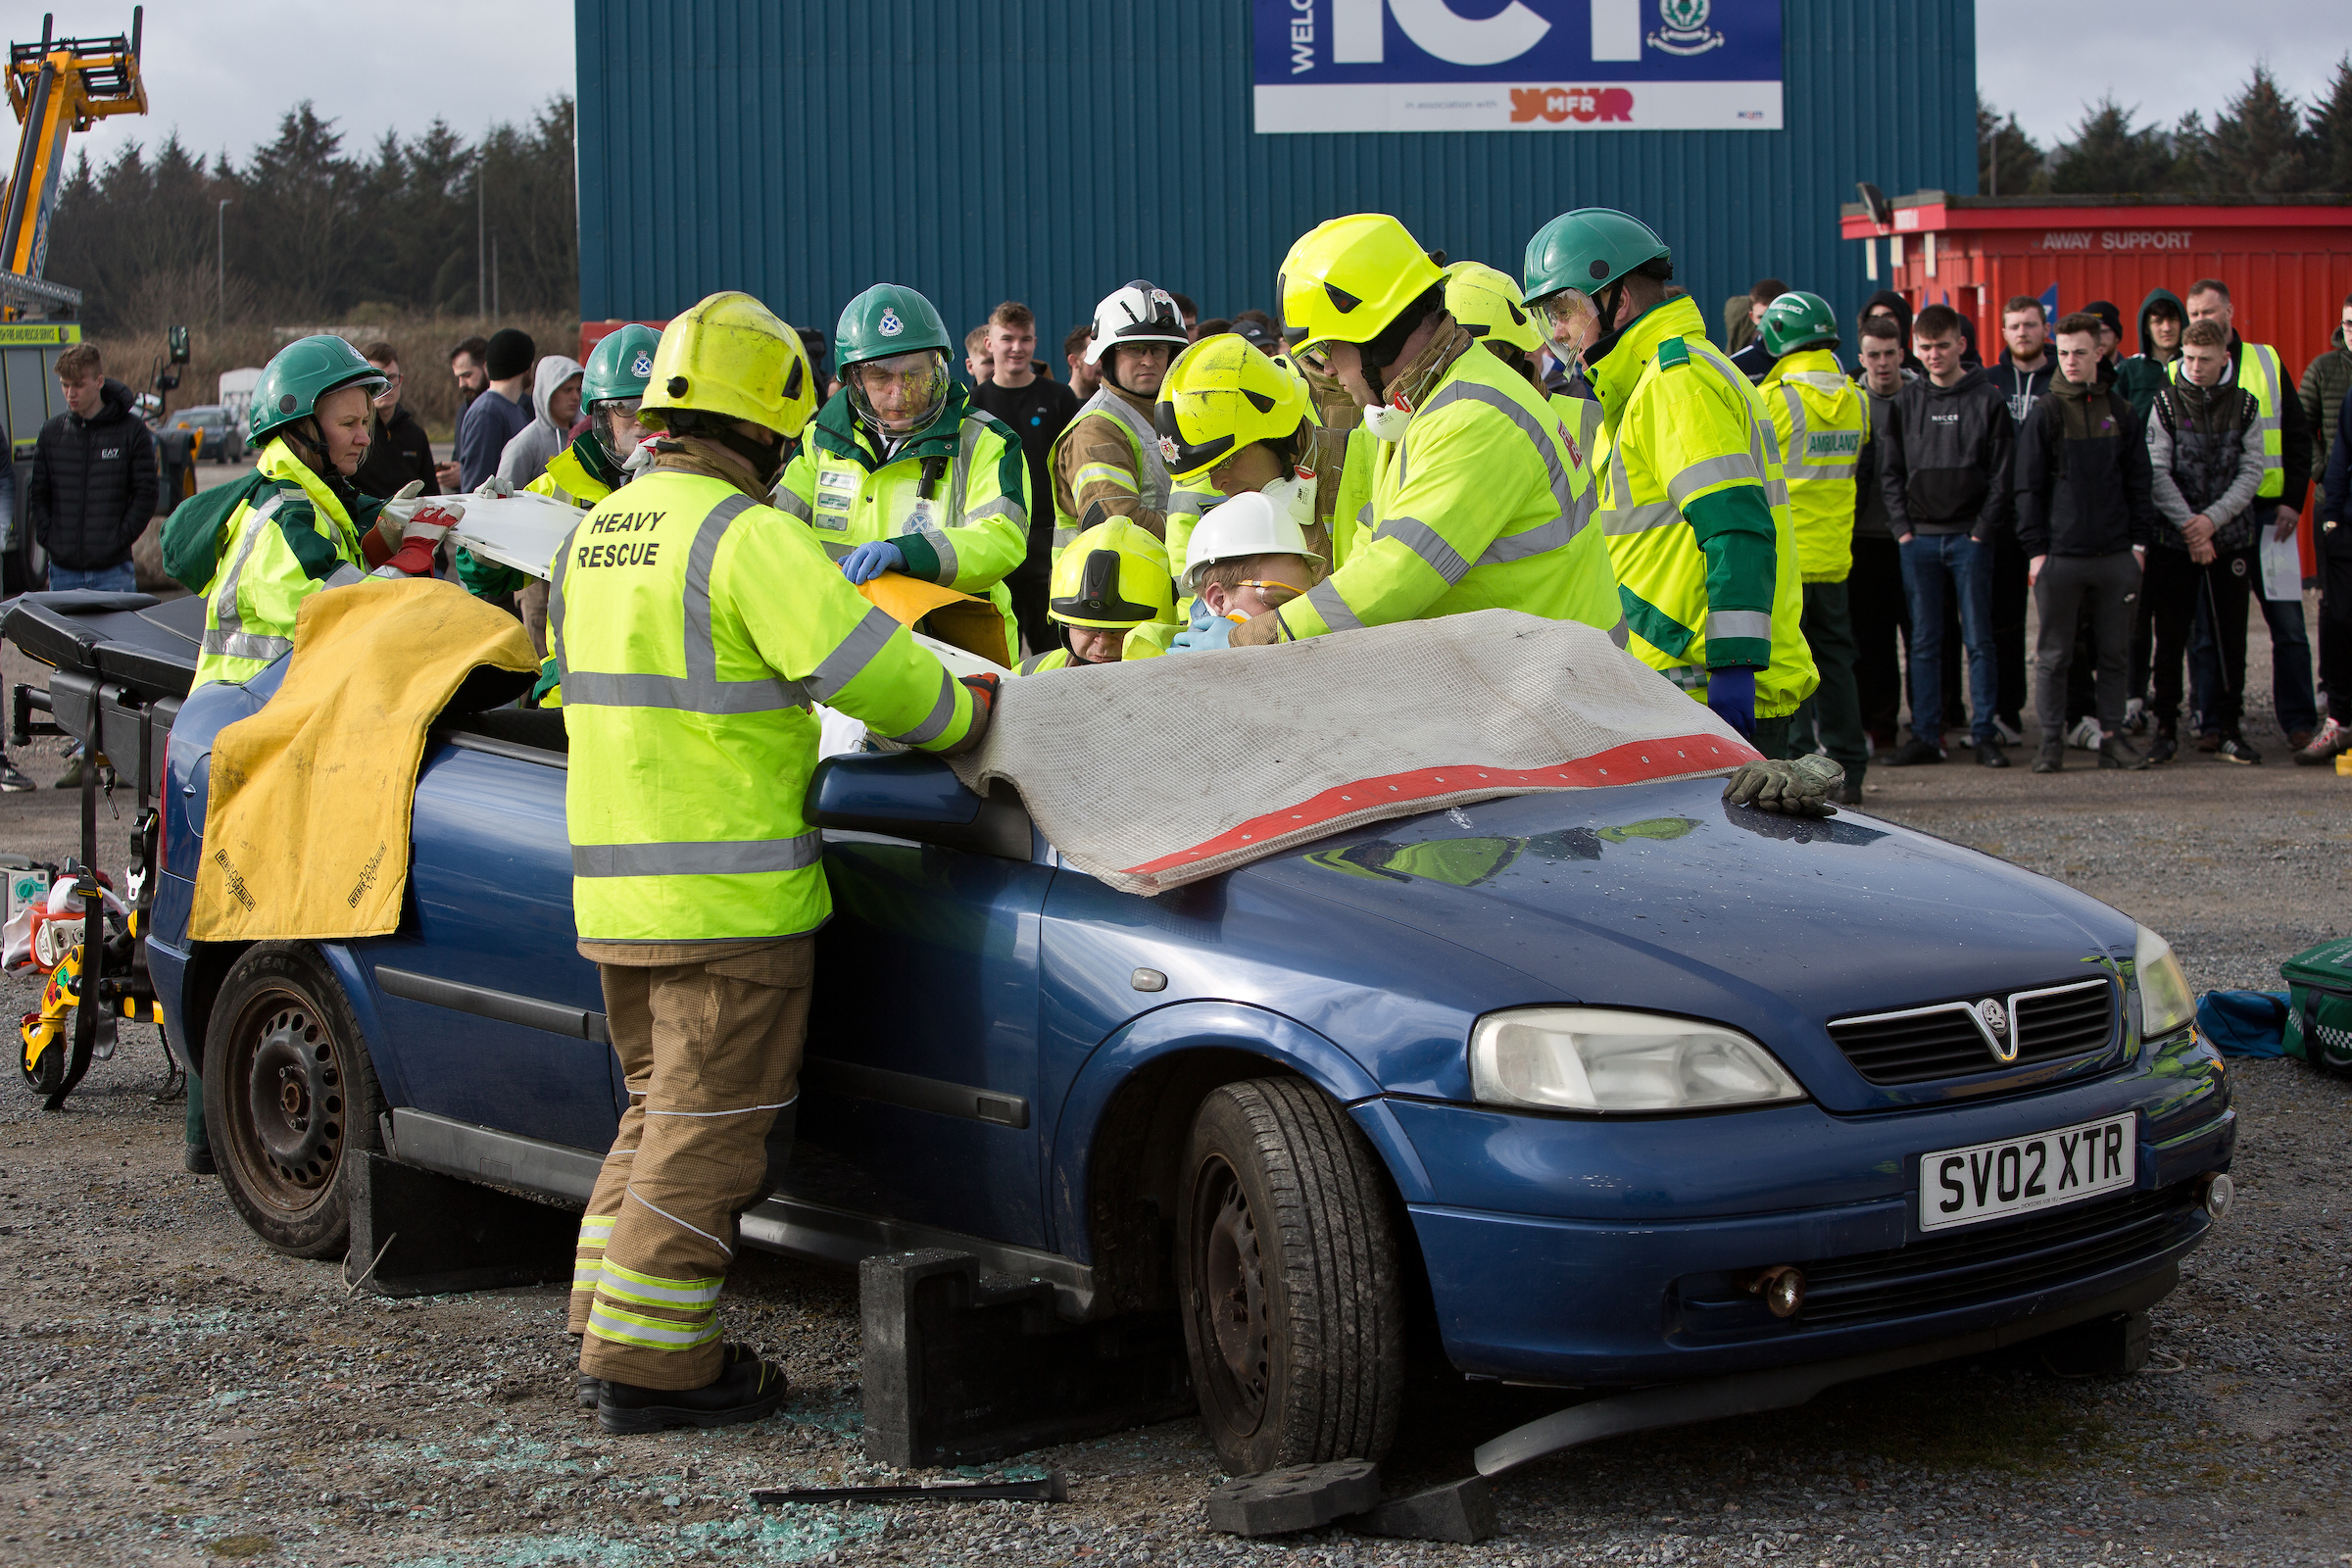 Highland emergency services to help keep construction workers safe on roads